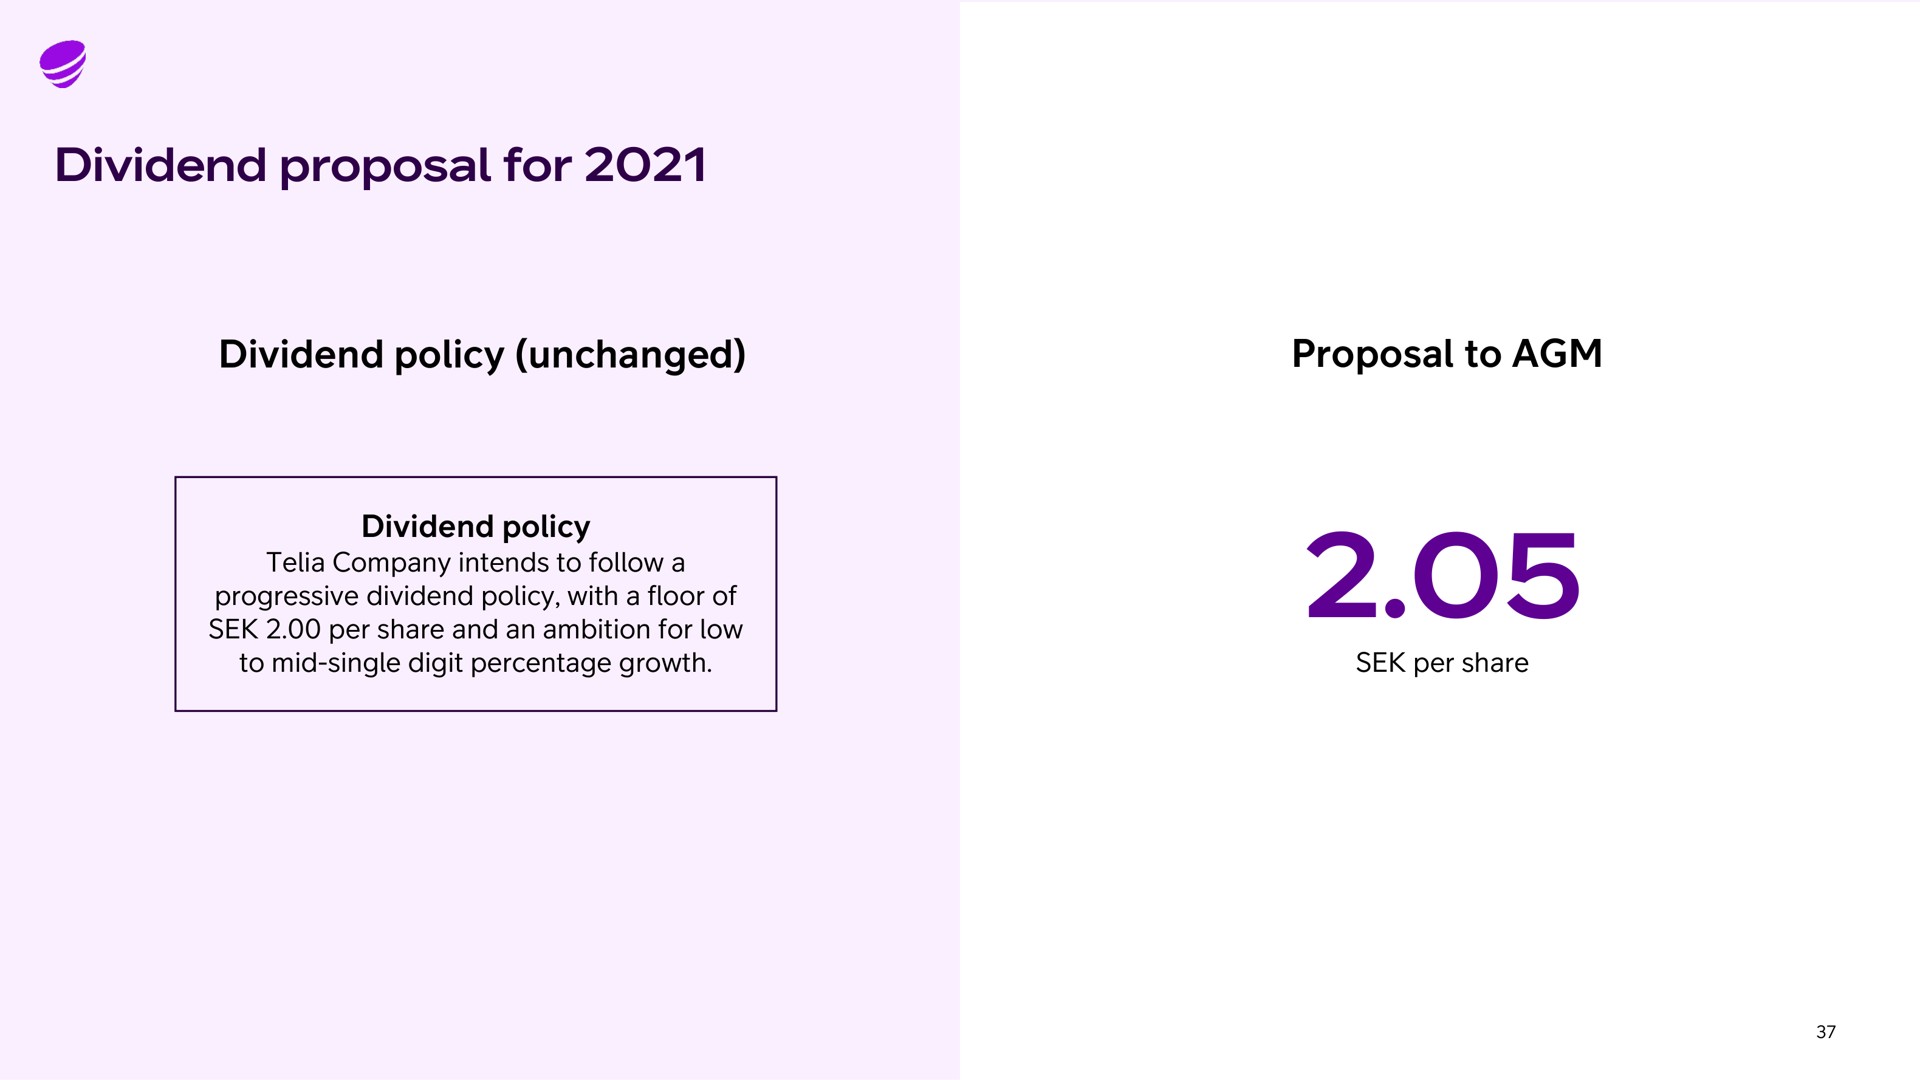 dividend proposal for dividend policy unchanged proposal to dividend policy company intends to follow a progressive dividend policy with a floor of per share and an ambition for low to mid single digit percentage growth per share | Telia Company